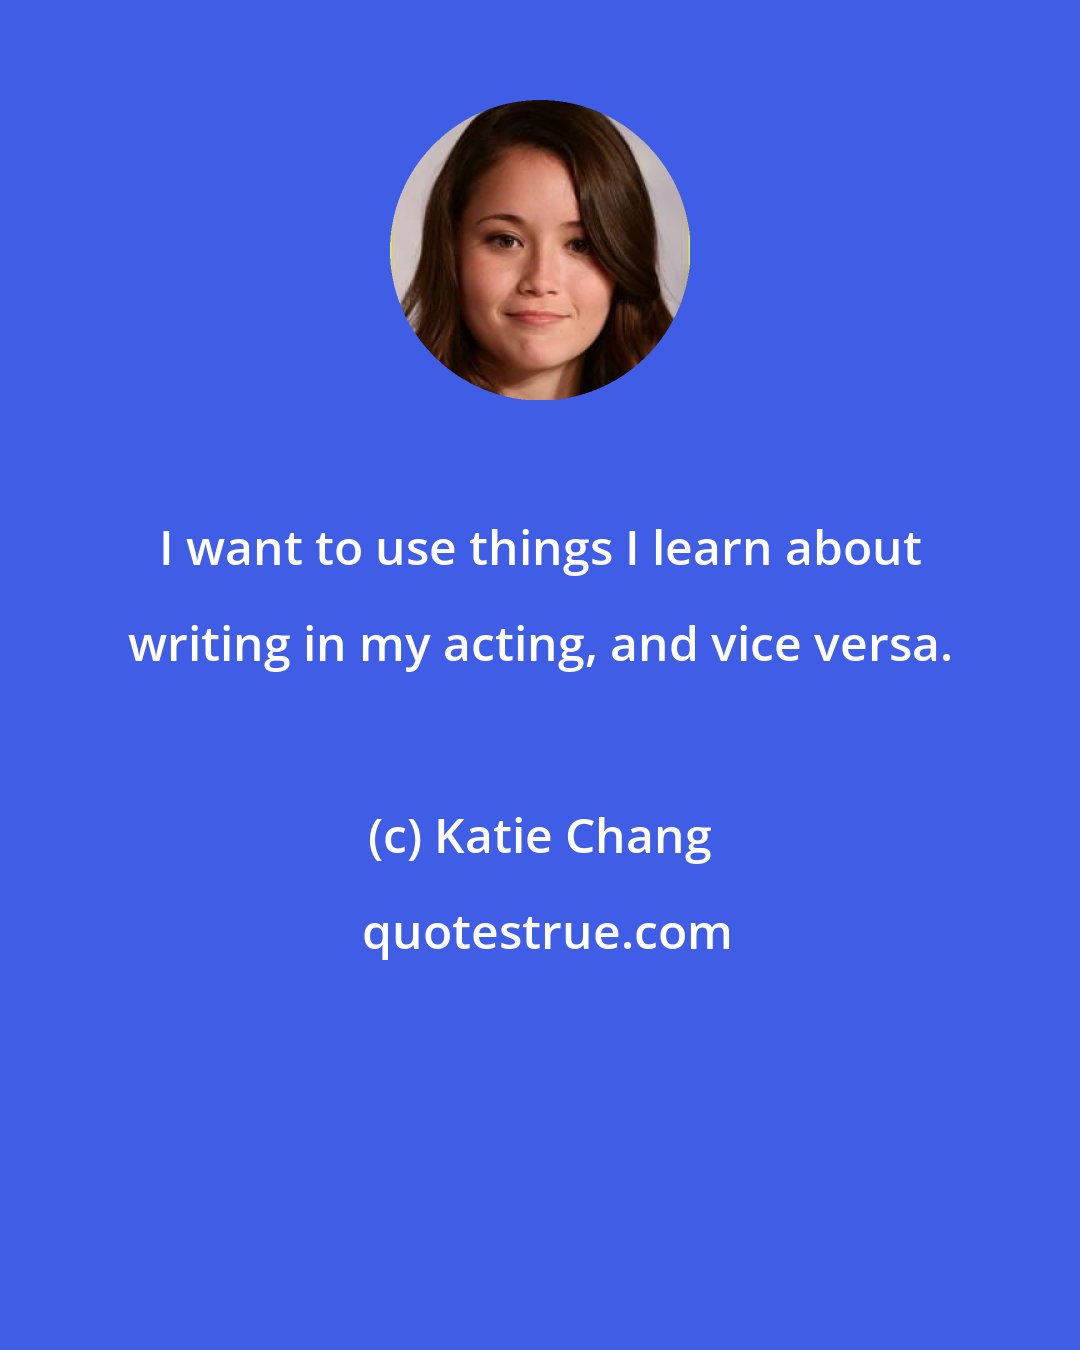 Katie Chang: I want to use things I learn about writing in my acting, and vice versa.